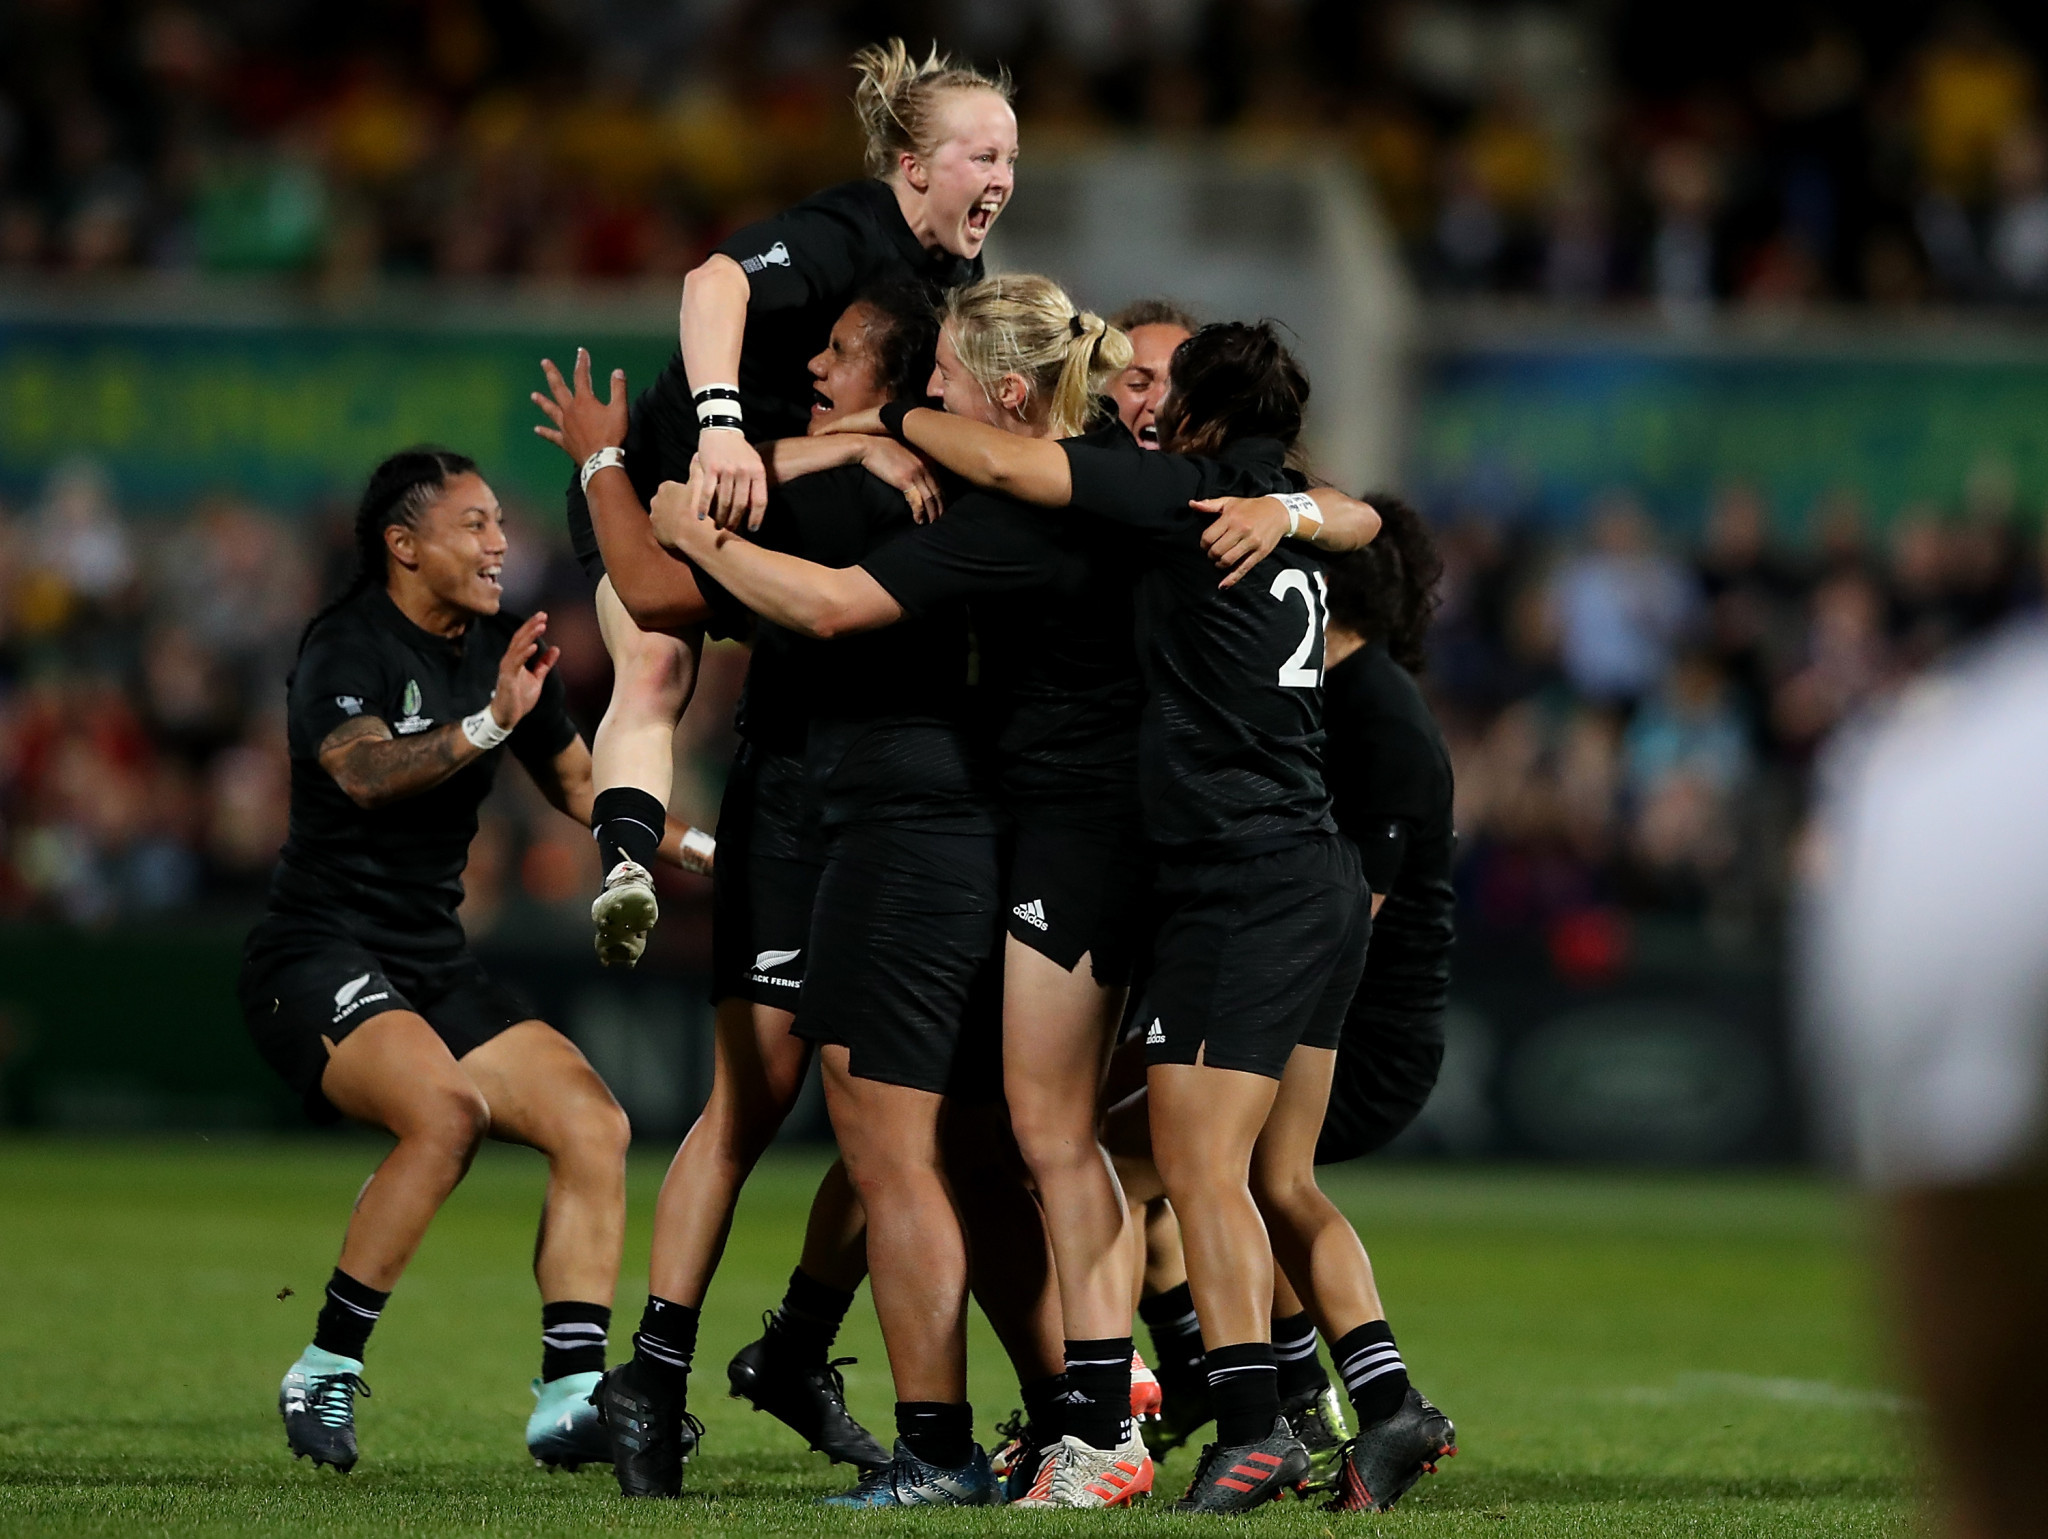 If New Zealand are picked to host the 2021 tournament, they will have a chance to defend their title on home soil ©Getty Images